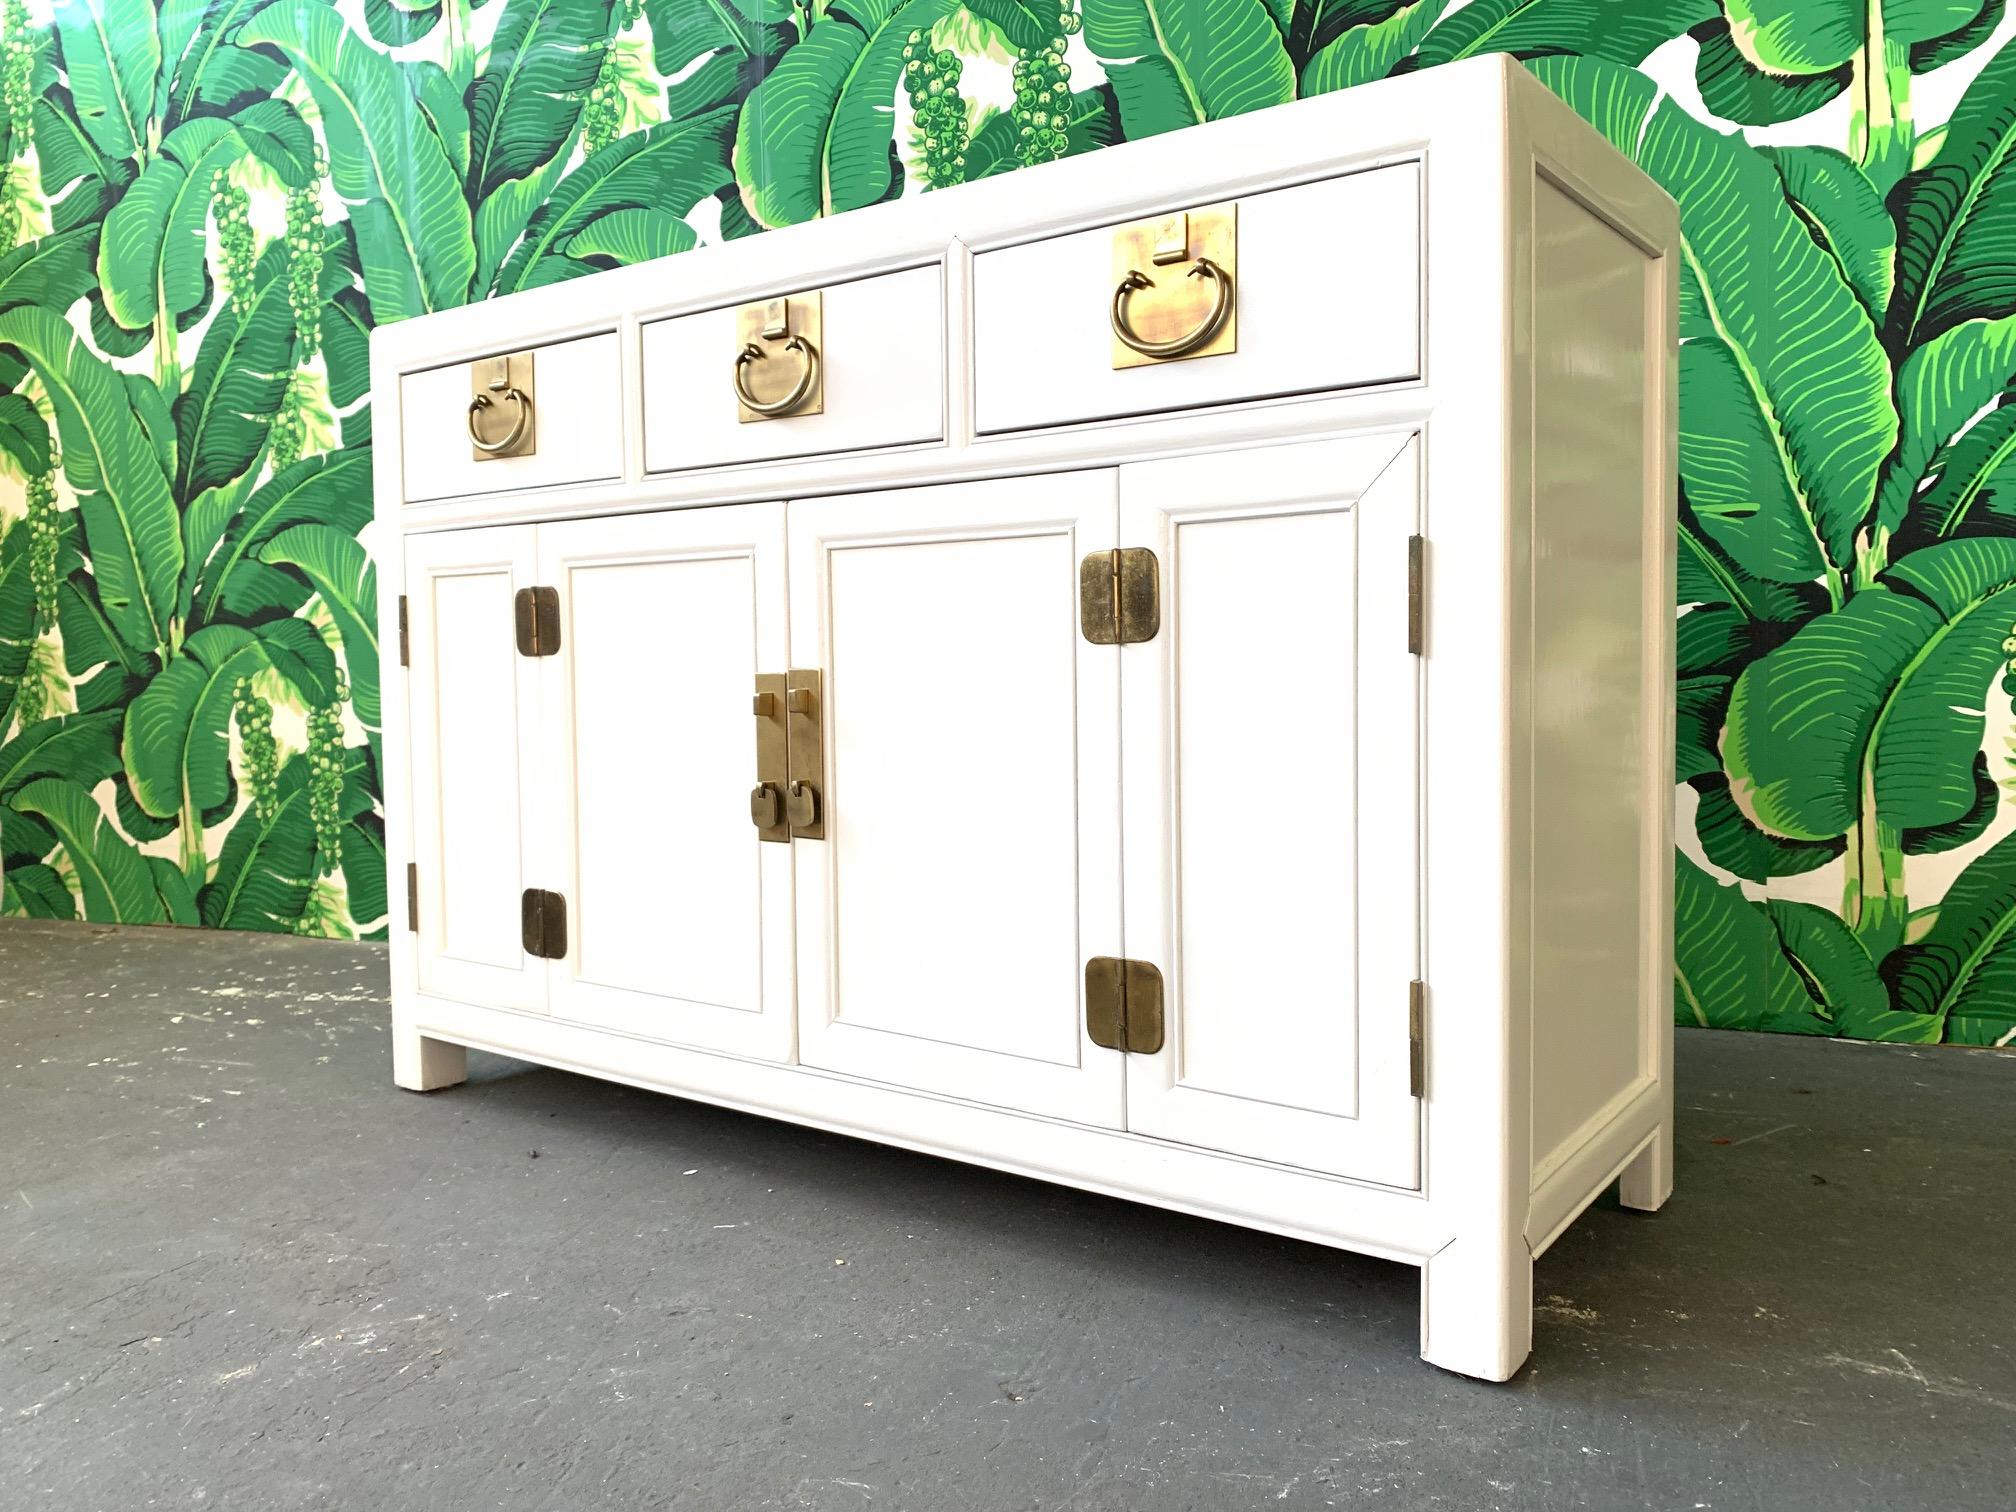 Ming style and brass hardware compliment the white lacquered hardwood of this sideboard made by Century Furniture as part of their Sabota collection. Articulated doors reveal storage cabinet with shelving. Good condition with minor imperfections to